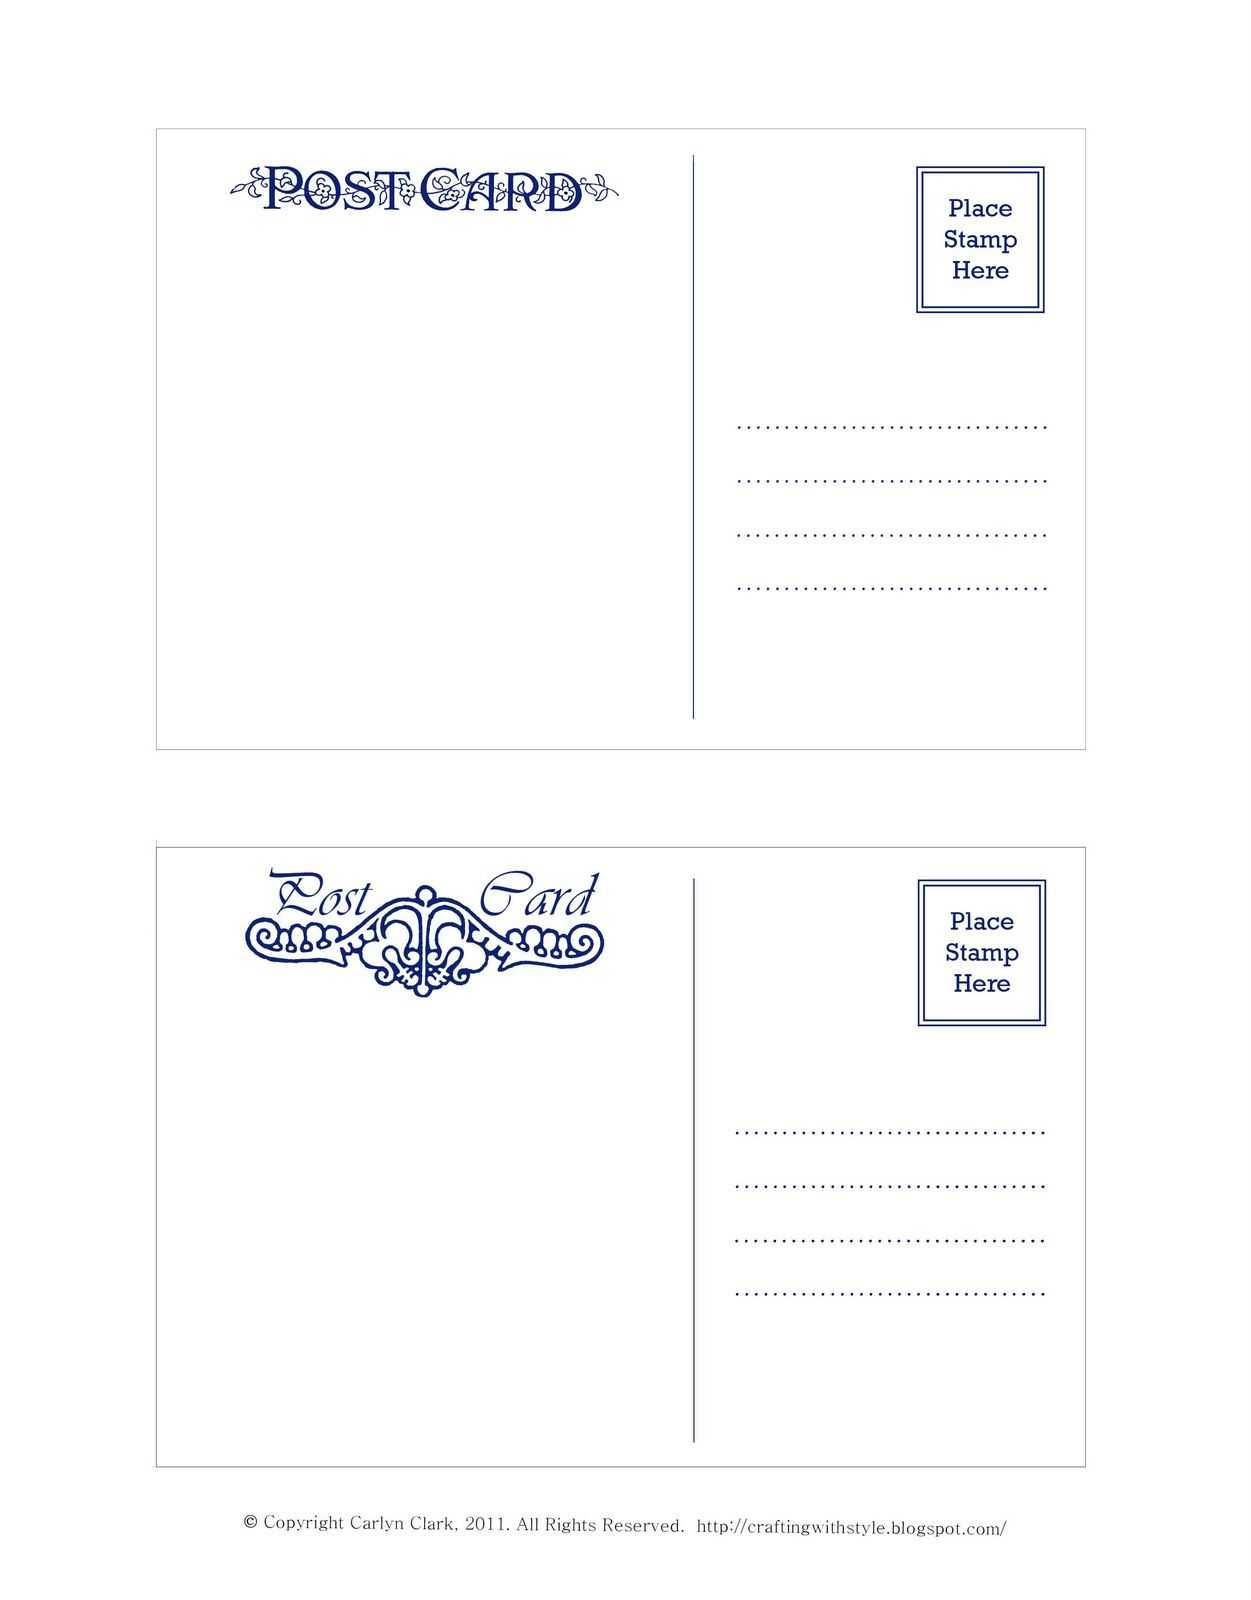 Crafting With Style: Free Postcard Templates | Free With Microsoft Word 4X6 Postcard Template